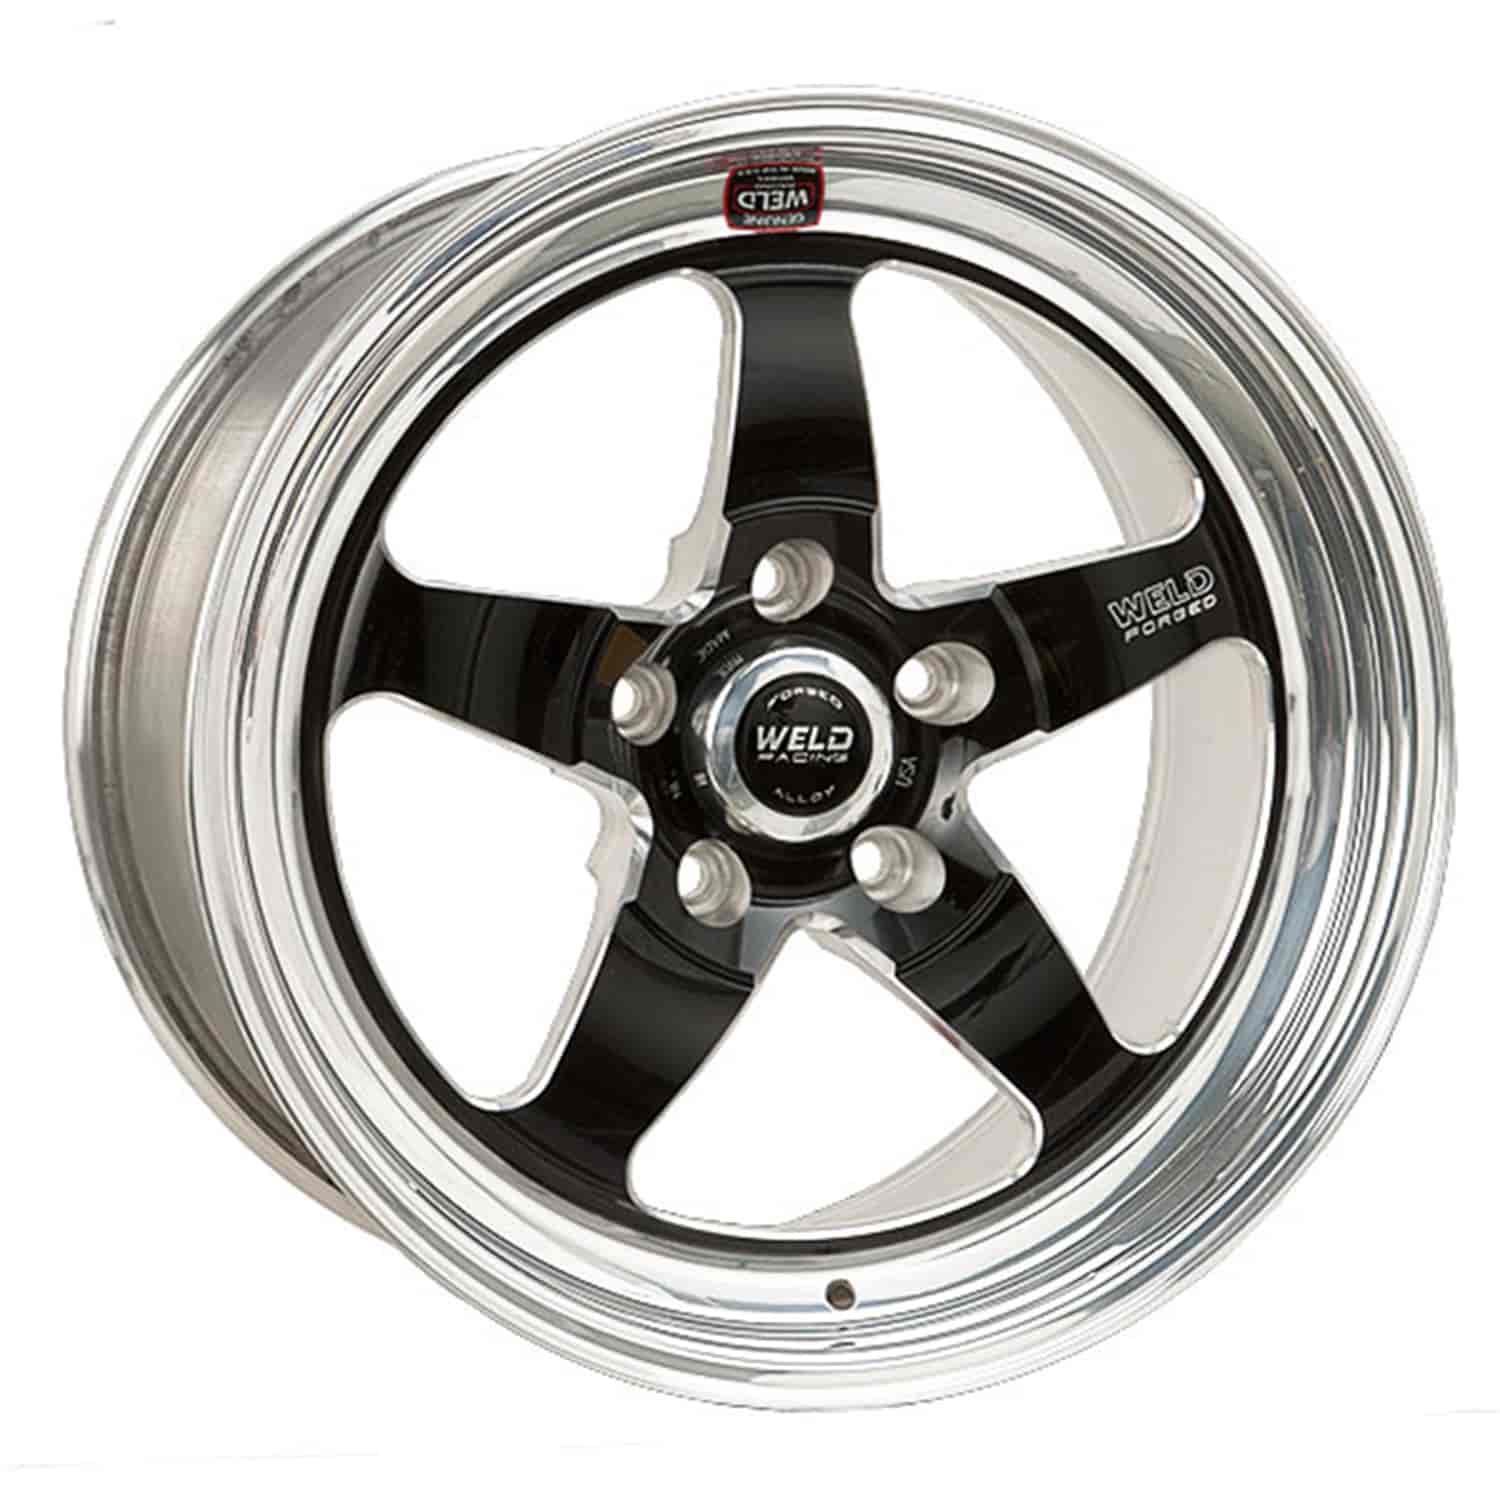 RT-S Series Wheel Size: 17" x 5" Bolt Circle: 5 x 120mm Rear Spacing: 3.30" Offset: +8mm